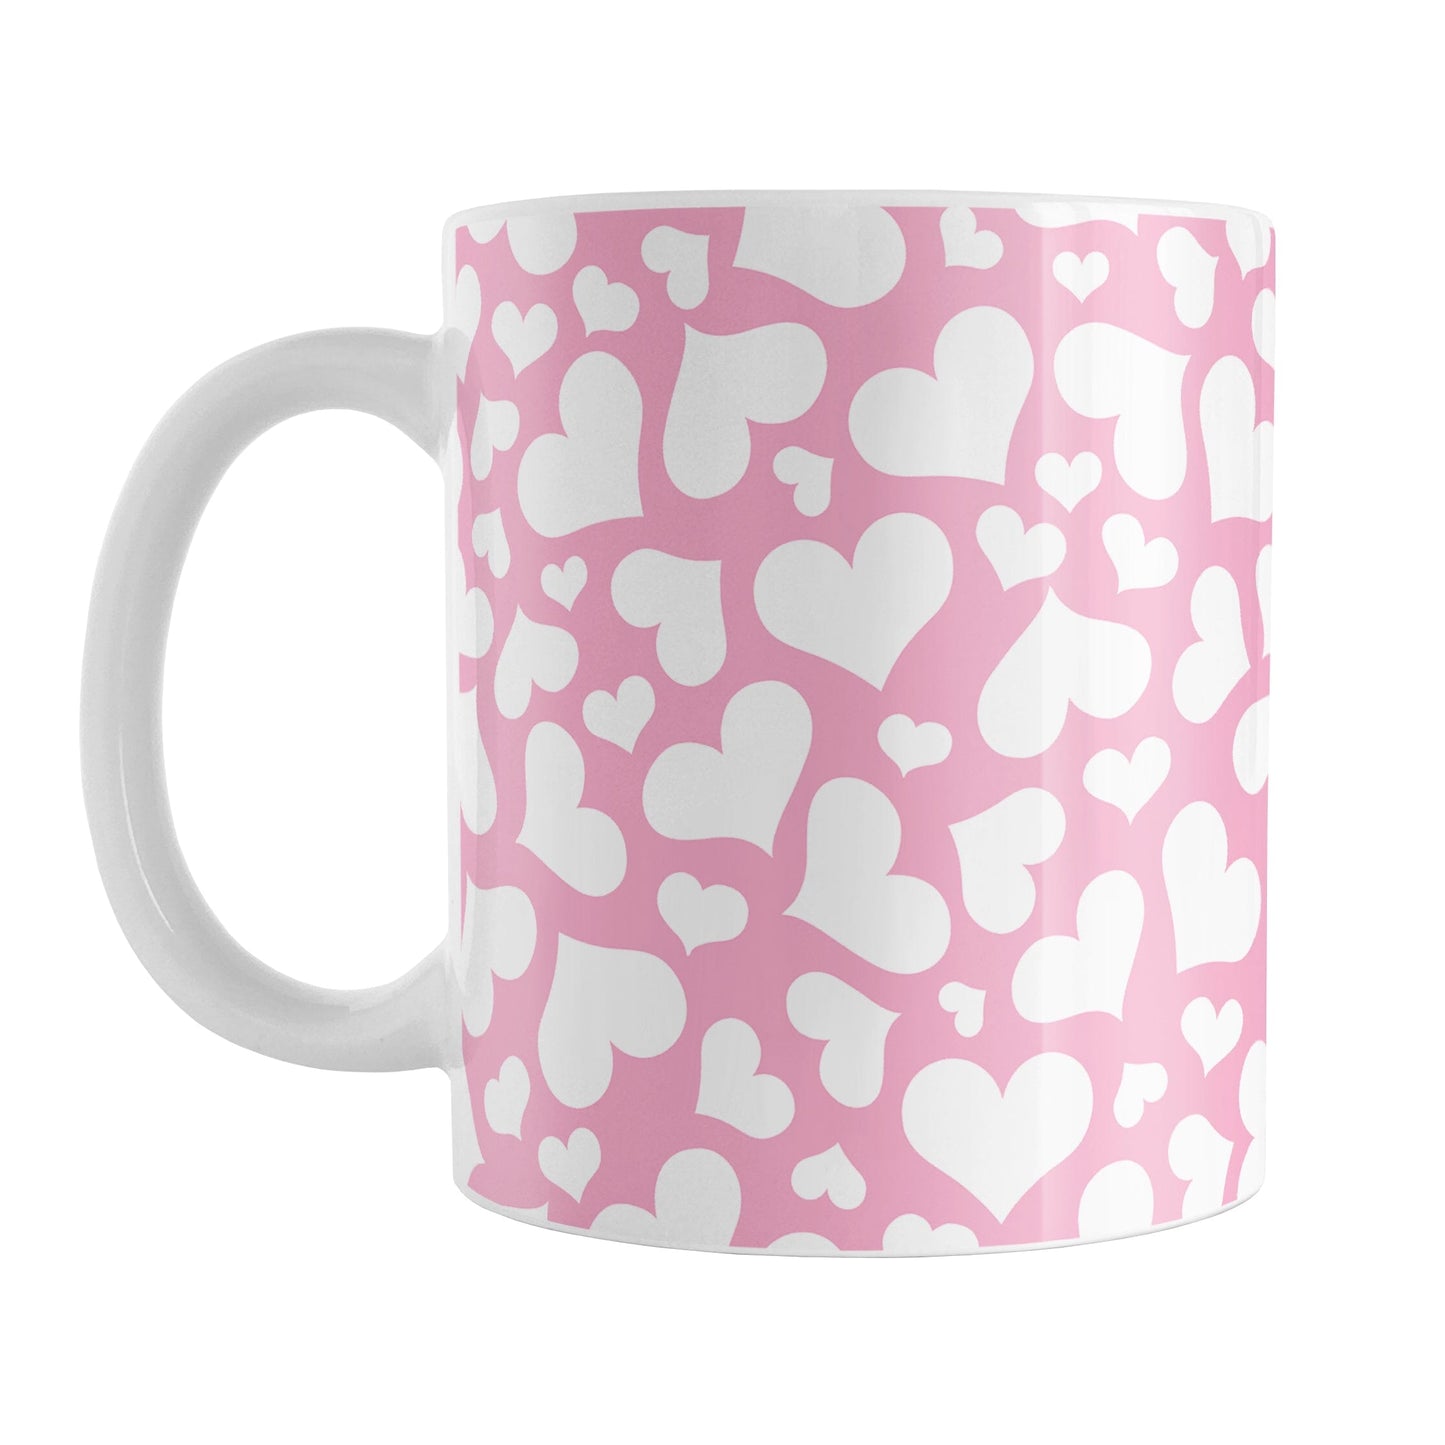 Cute White Hearts on Pink Mug (11oz) at Amy's Coffee Mugs. A ceramic coffee mug designed with a multi-directional pattern of cute white hearts over a pink background color that wraps around the mug to the handle.